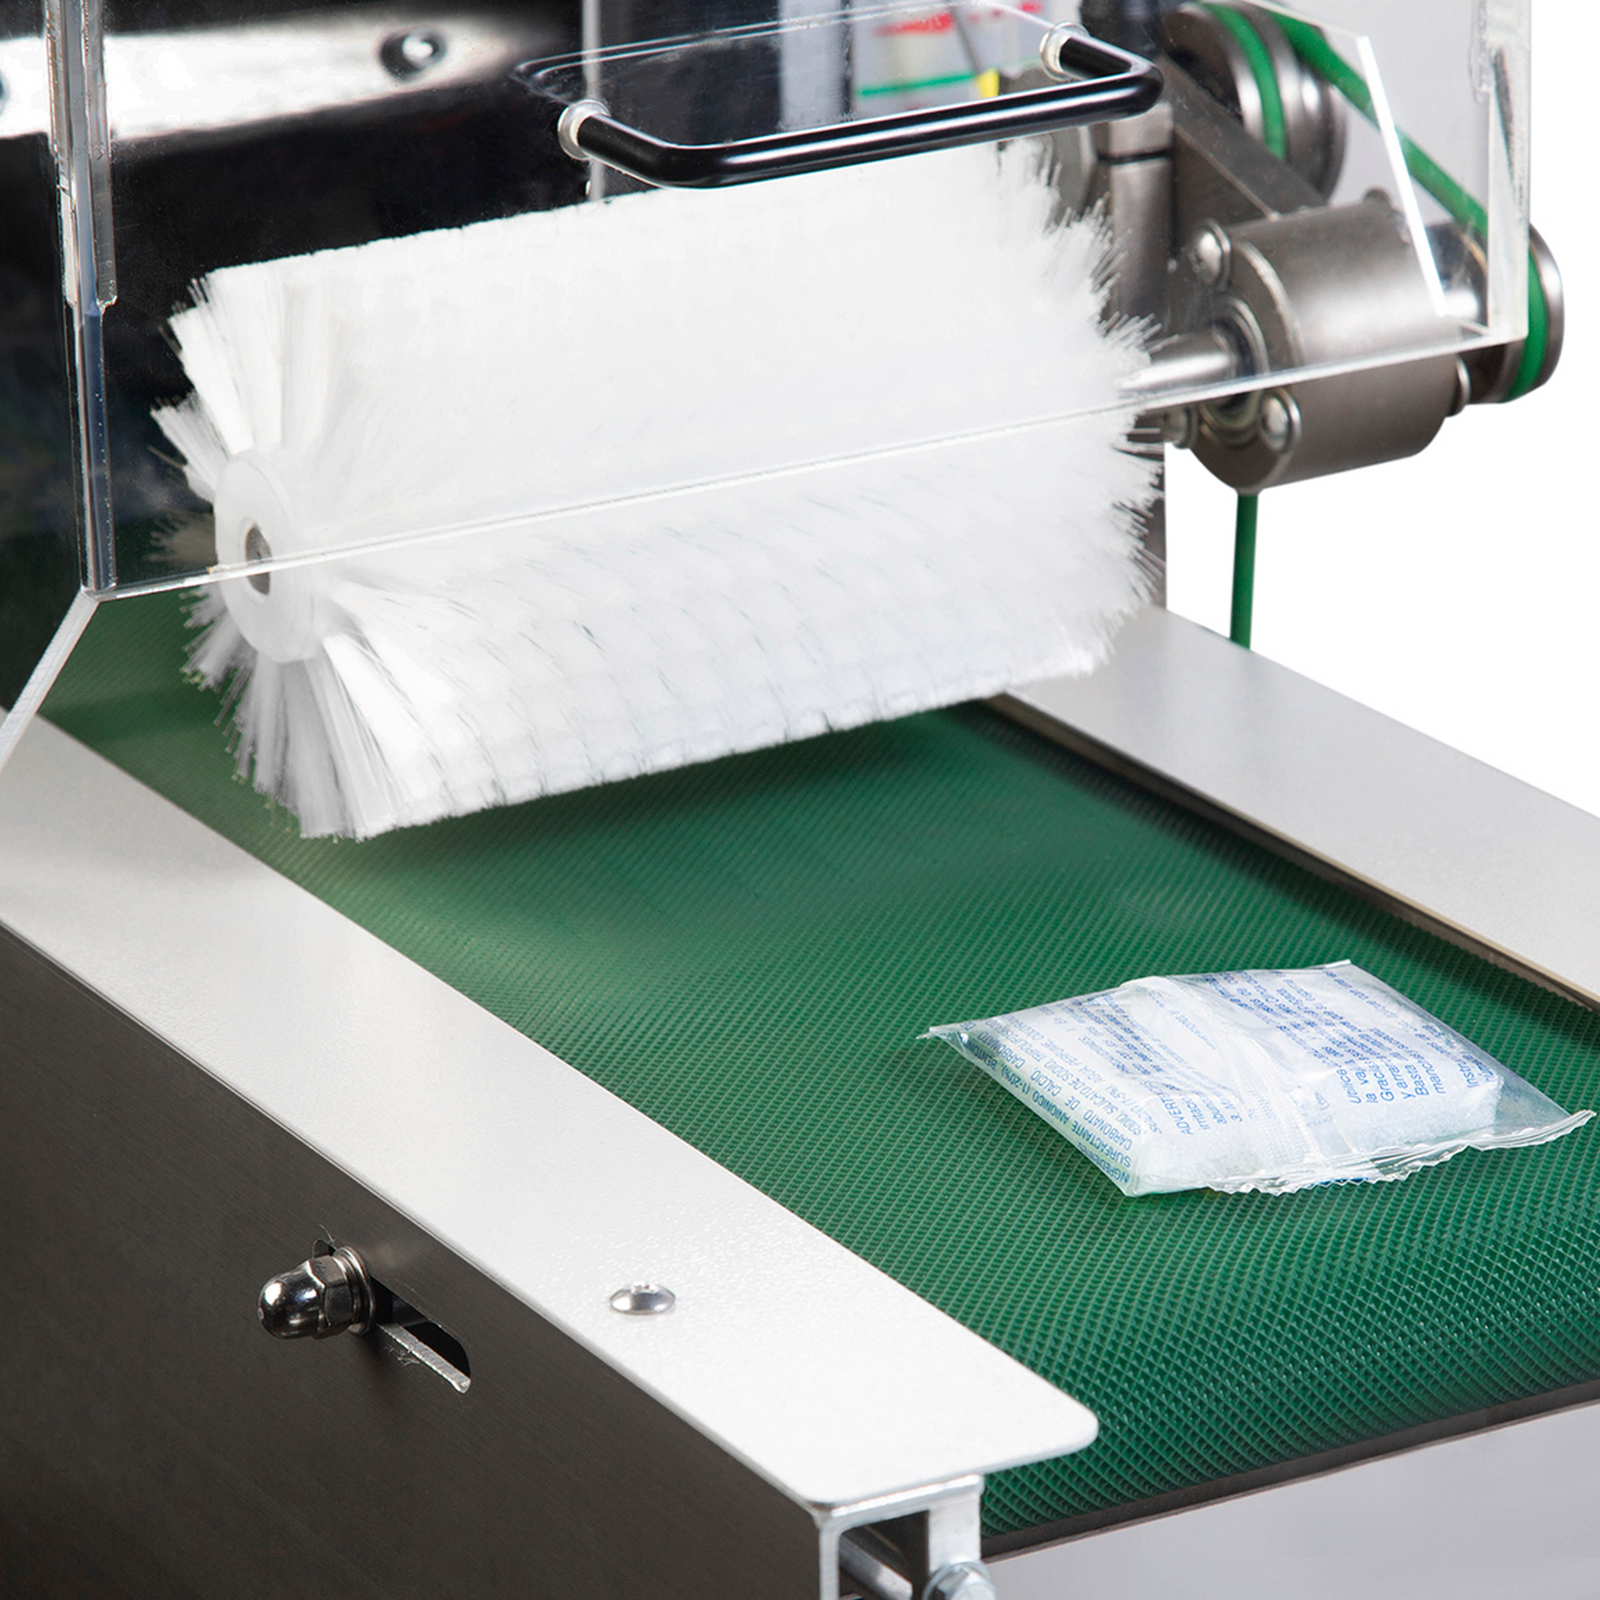 Pillow package with a product inside, on a textured green exit takeaway conveyor after being sealed by an inverted HFFS automatic flow wrapping machine